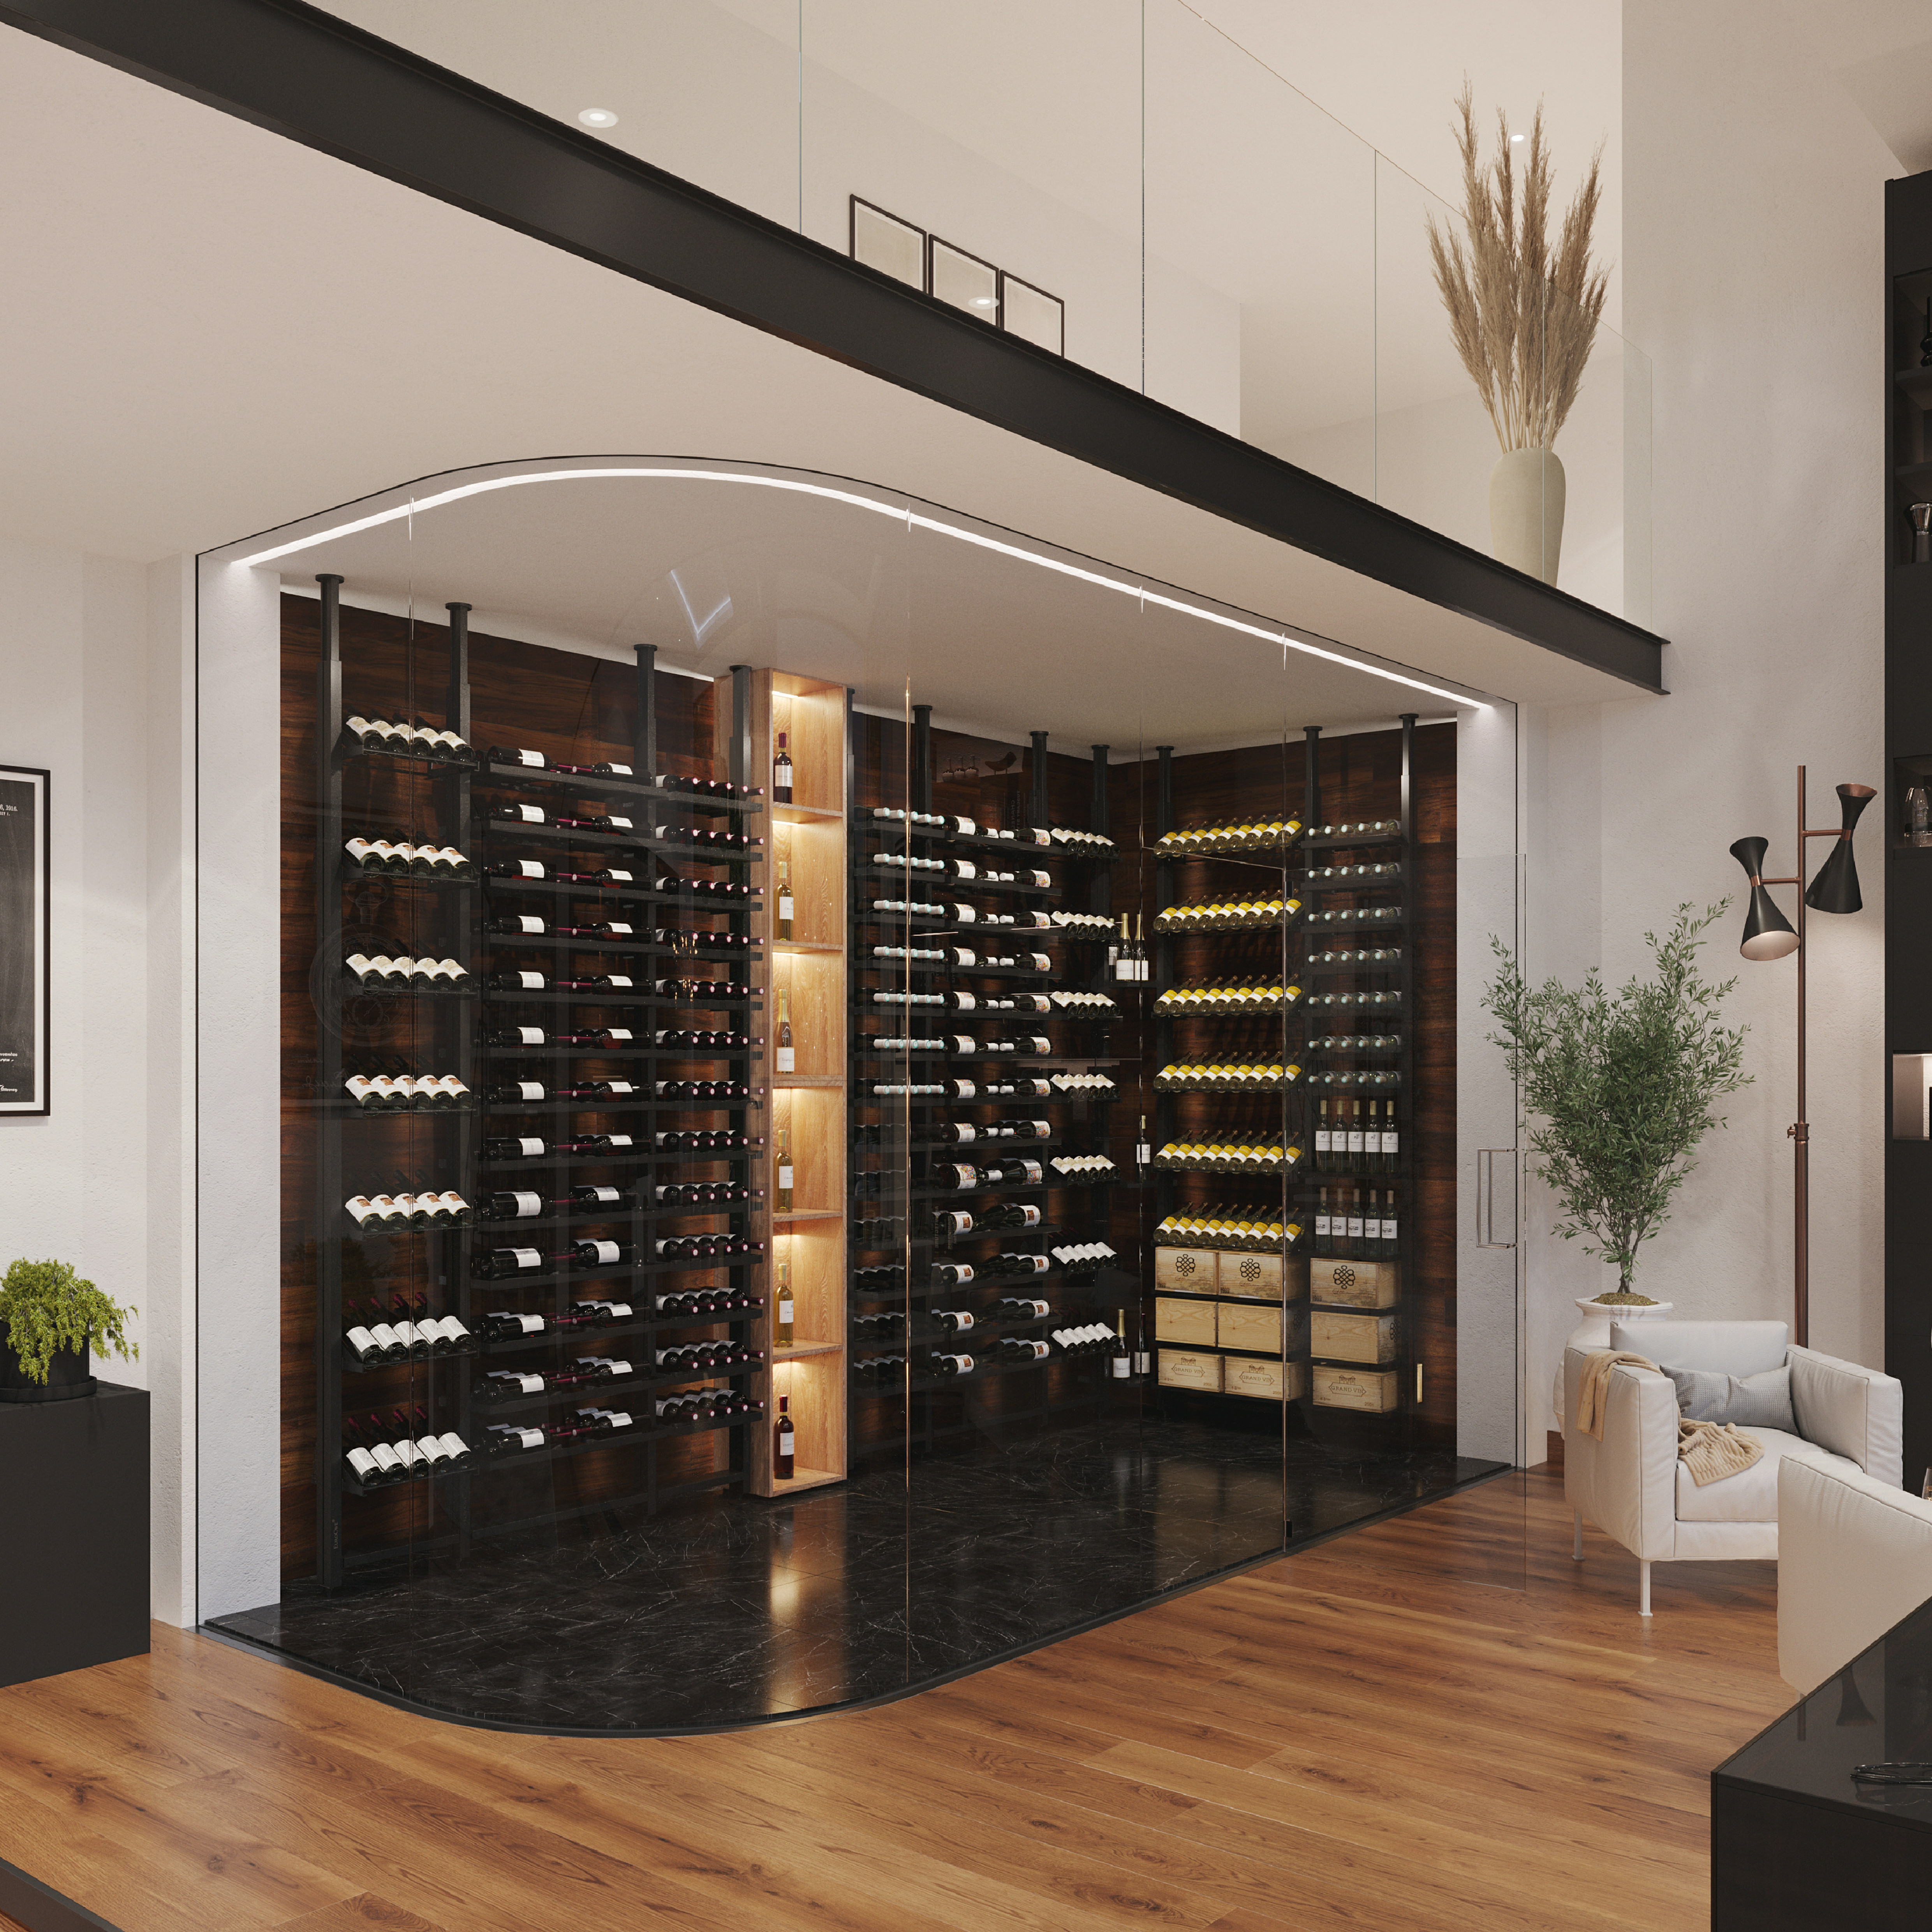 Metal wine storage with hanging bottles. High-end cellar layout. Ceiling or wall mounting. Lighting optional. Several ways to present your wines.